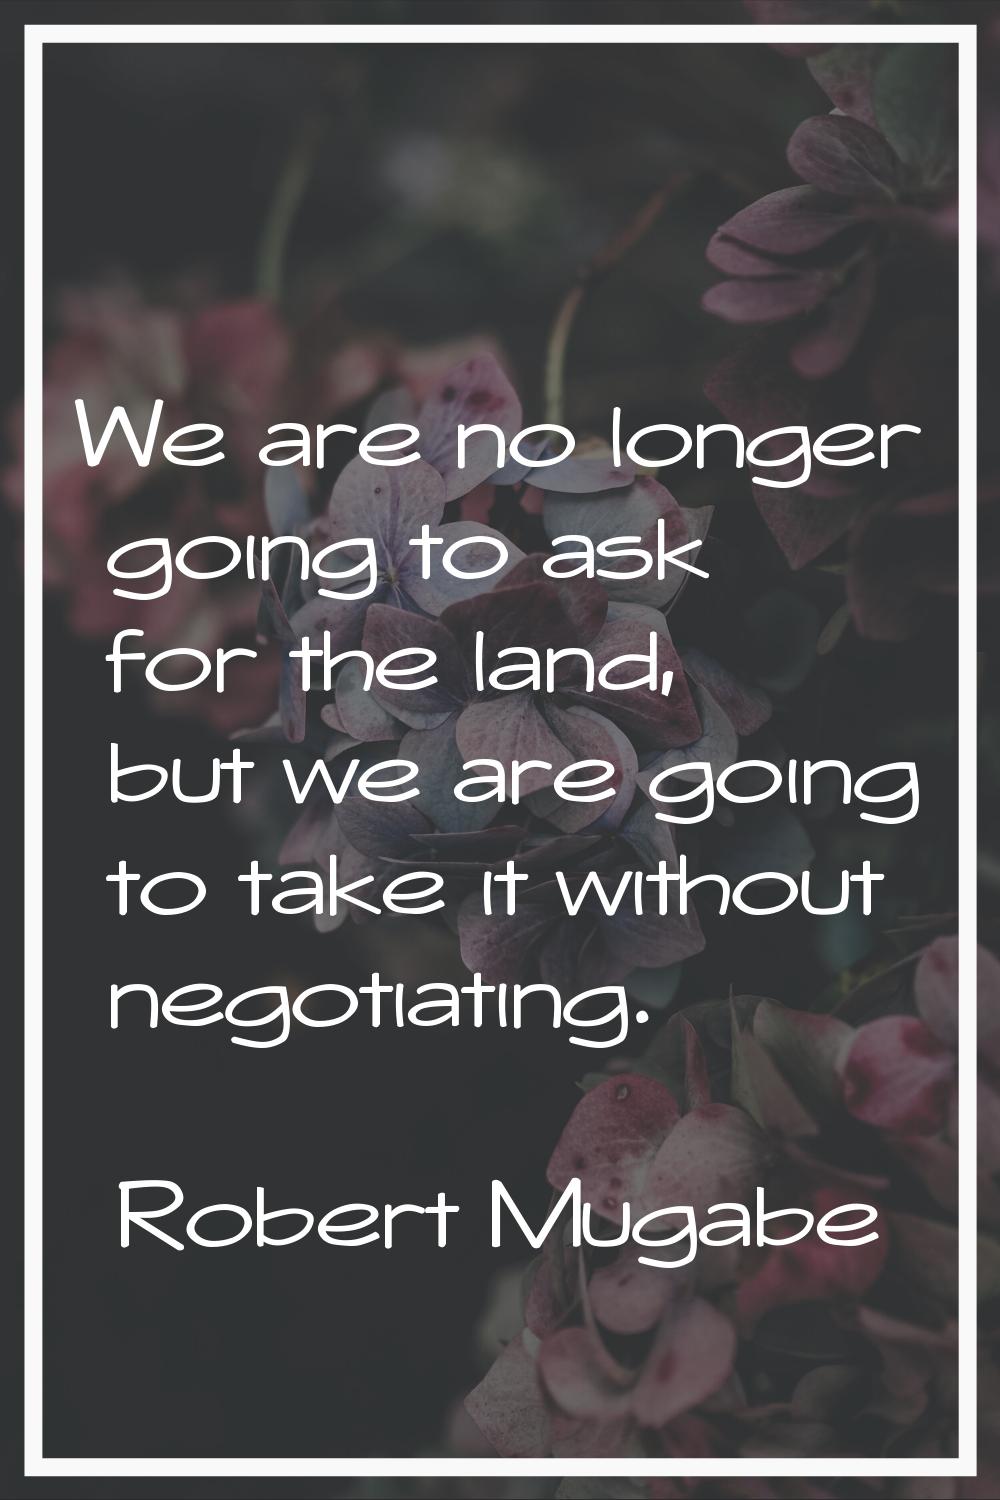 We are no longer going to ask for the land, but we are going to take it without negotiating.